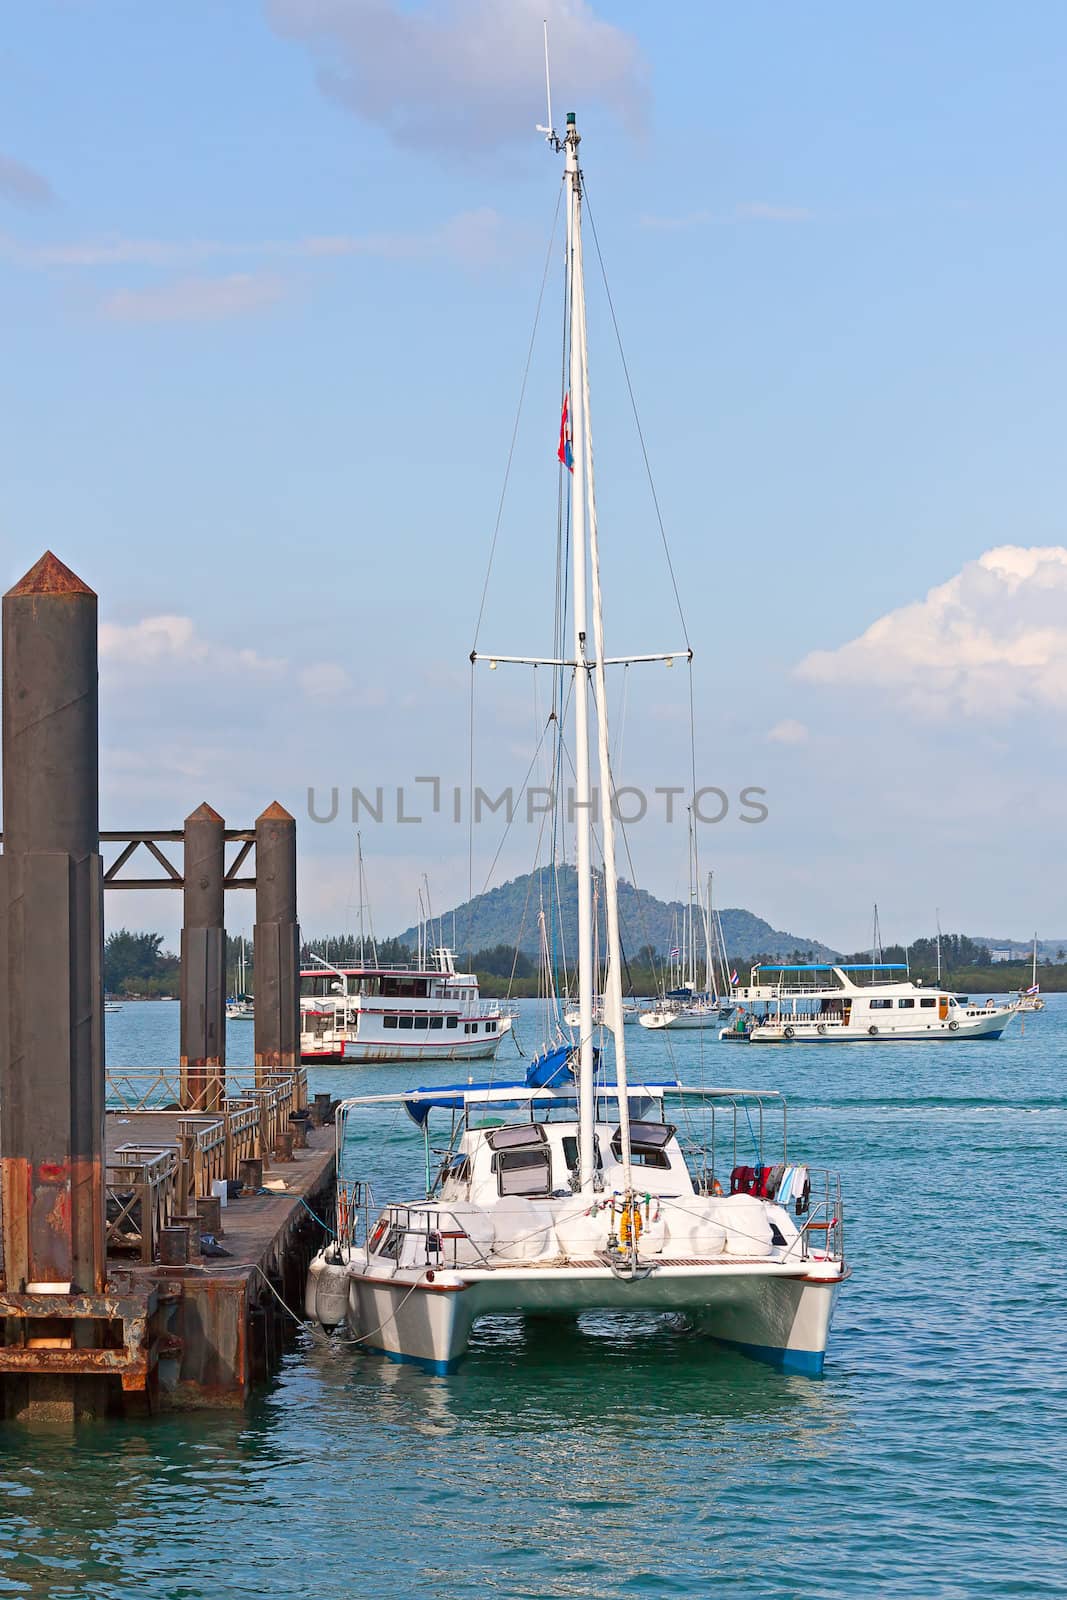 Yacht at berth in background of ships and blue sky, Thailand.